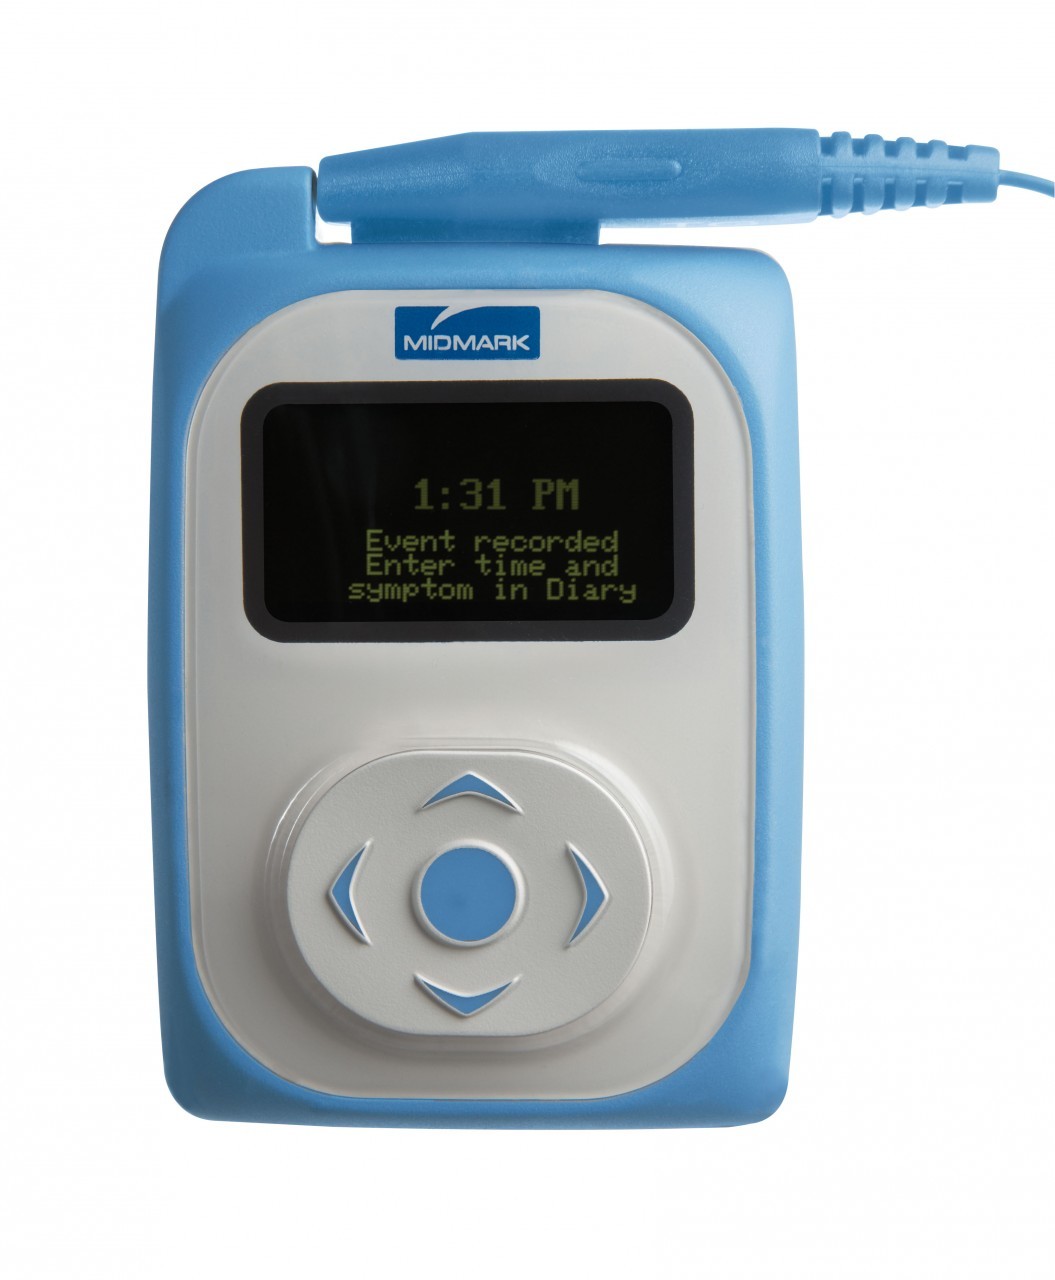 Midmark Iqholter # 4-000-0116 - IQholter EP Digital Holter with Pacemaker Detection & Recorder, No Software, Each